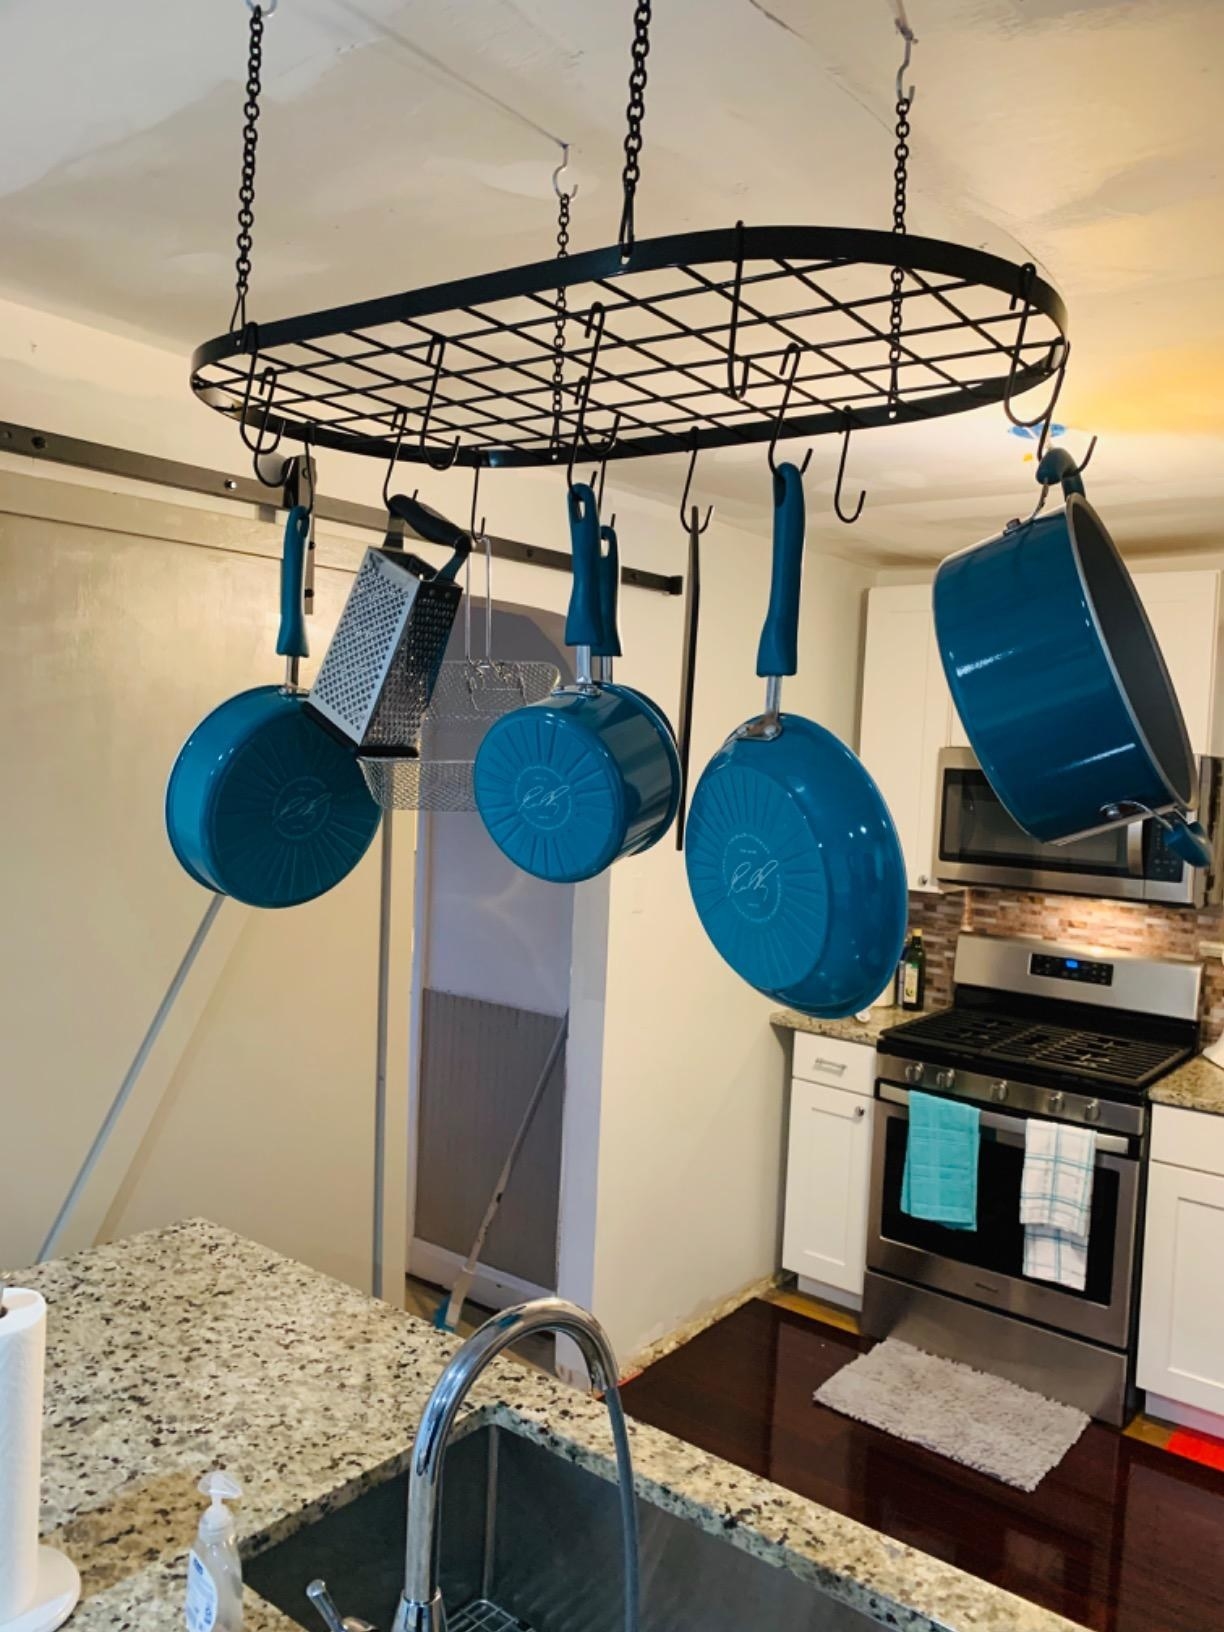 the ceiling mount holding a set of matching pots and pans